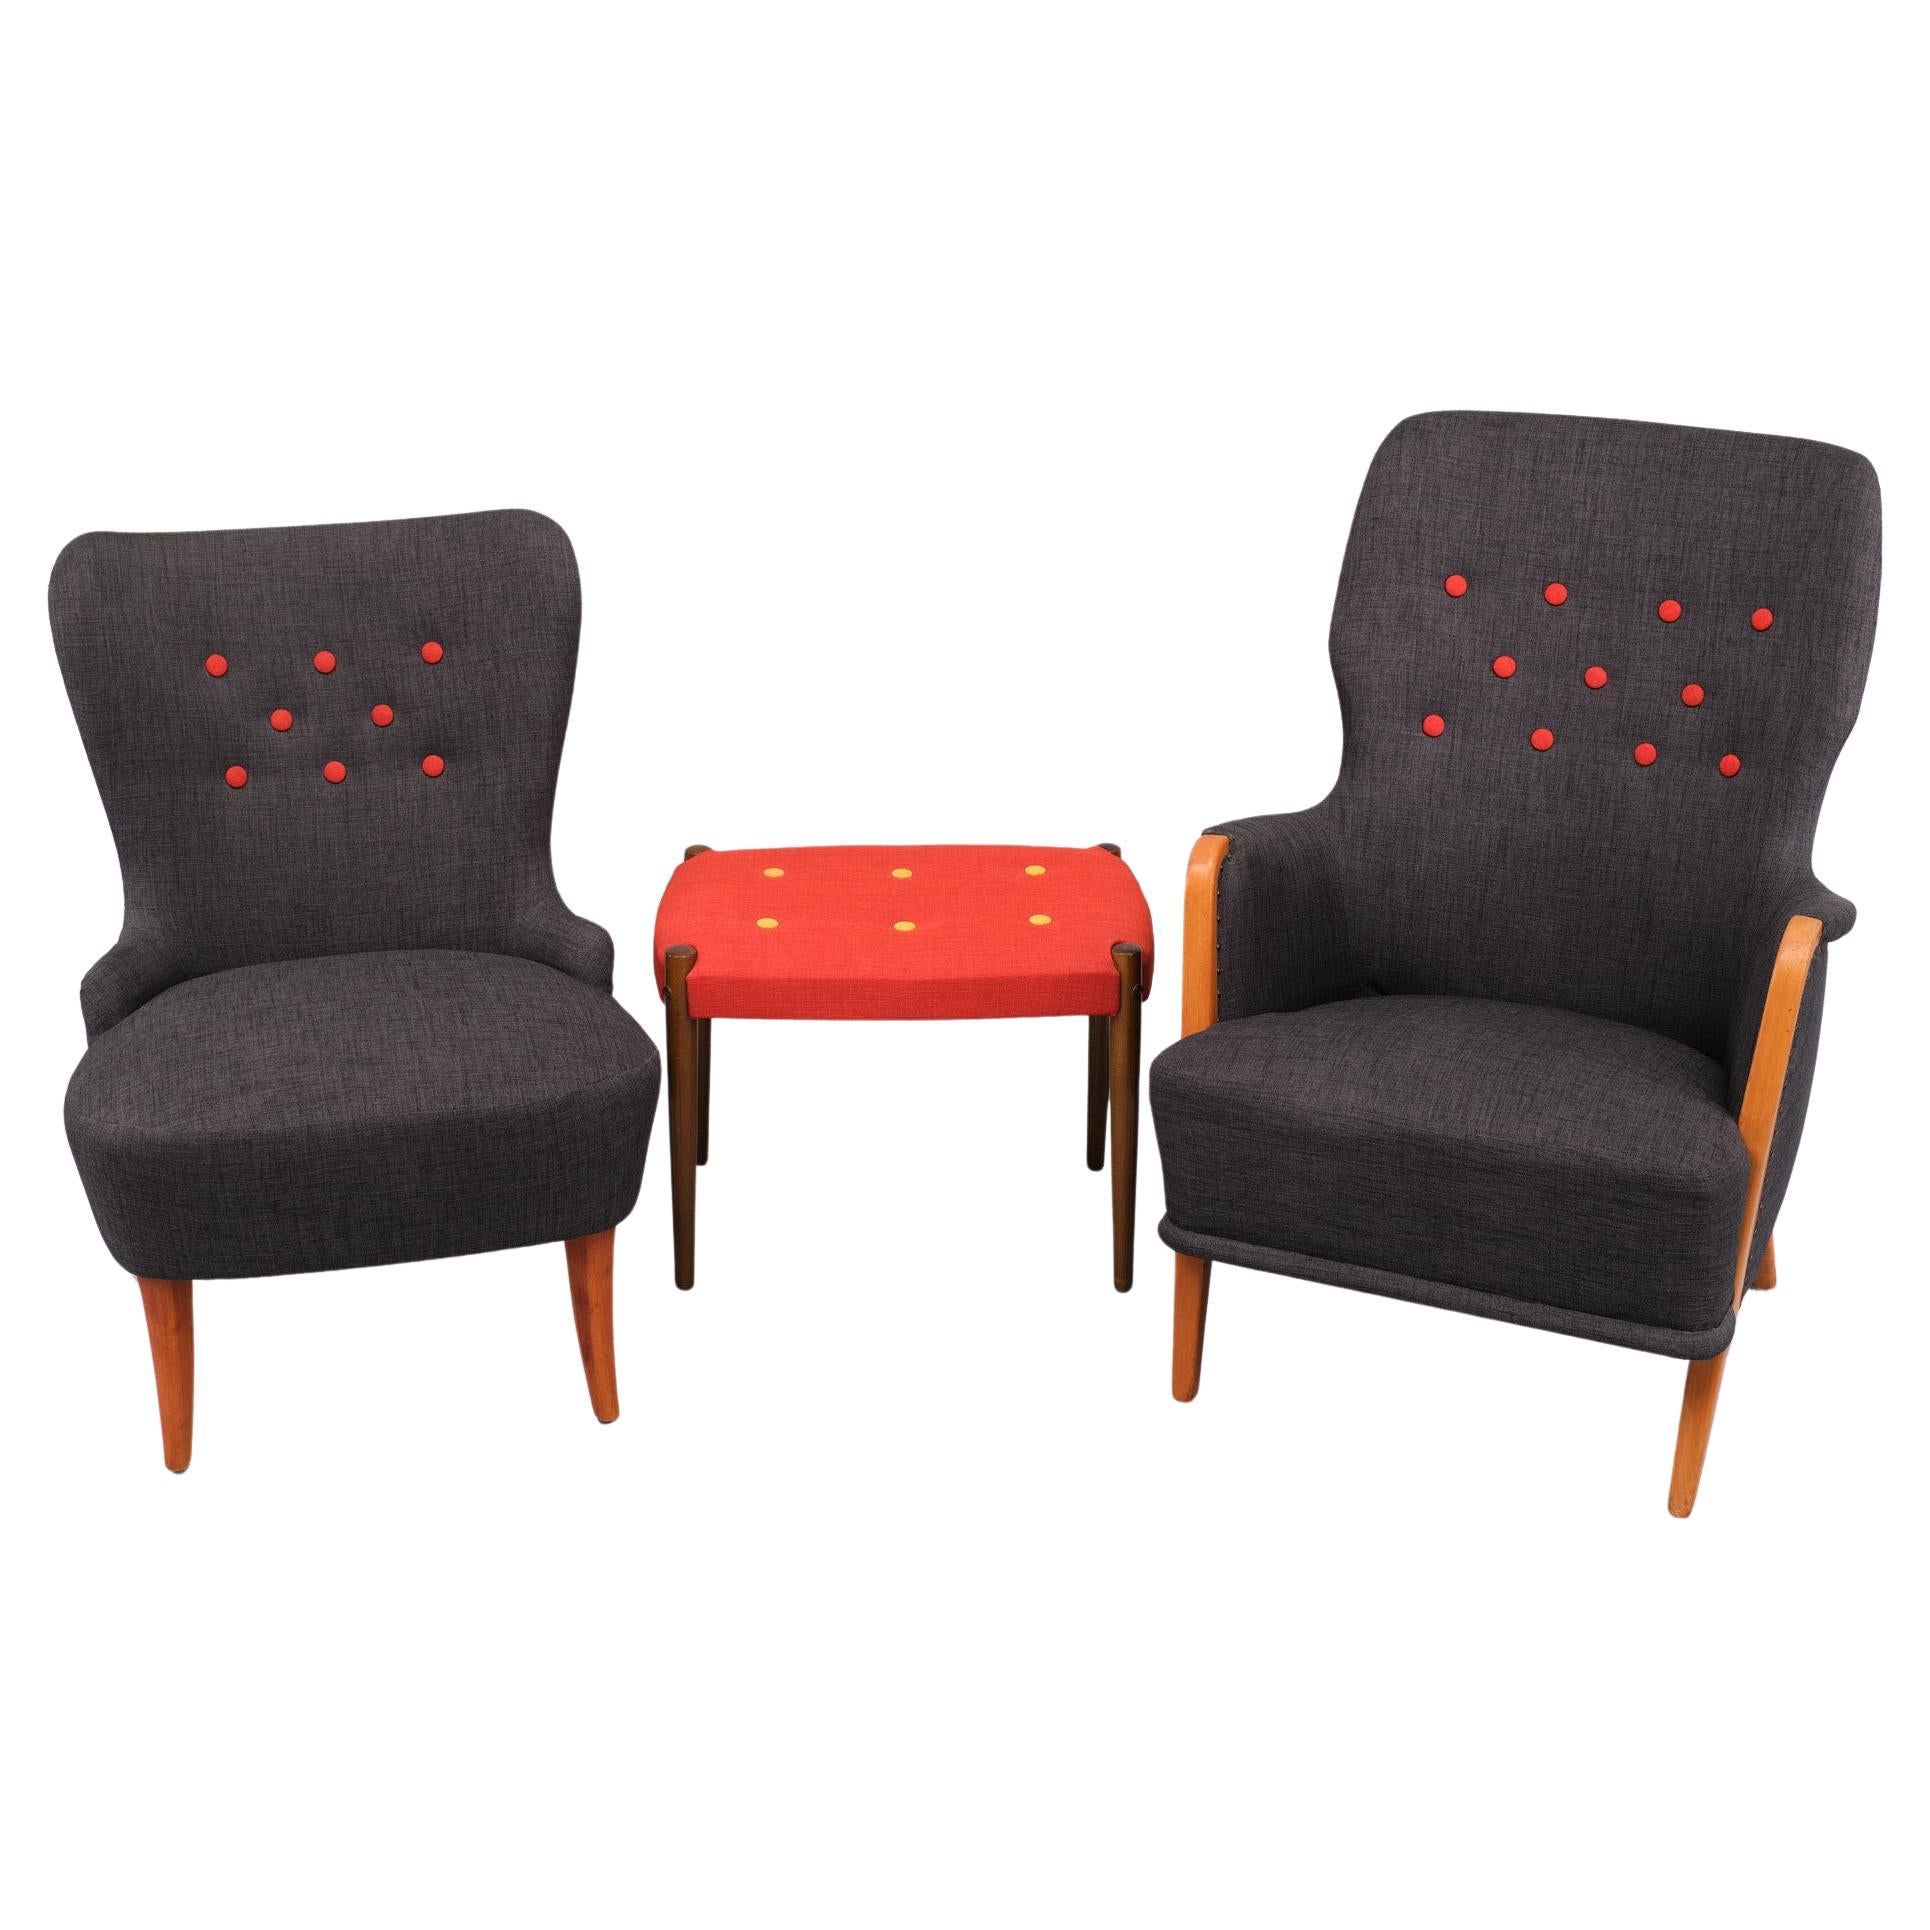 For Him and Her  Easy chairs and matching ottoman . 1950s   (Niederländisch) im Angebot